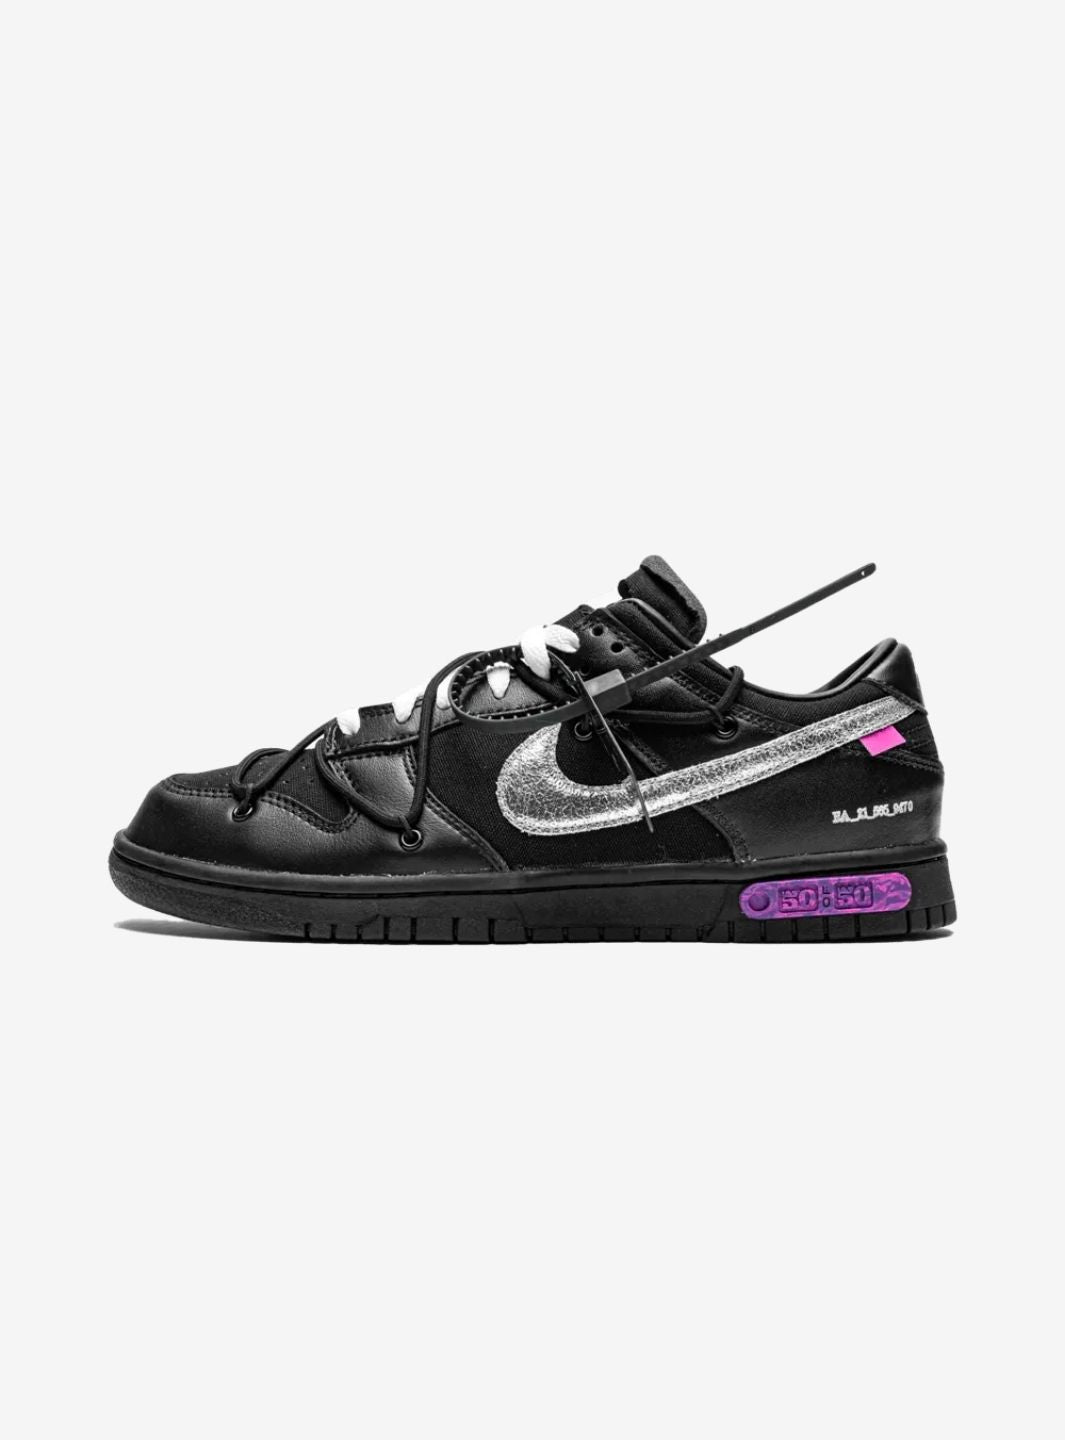 Nike Dunk Low Off-White Lot 50 - DM1602-001 | ResellZone